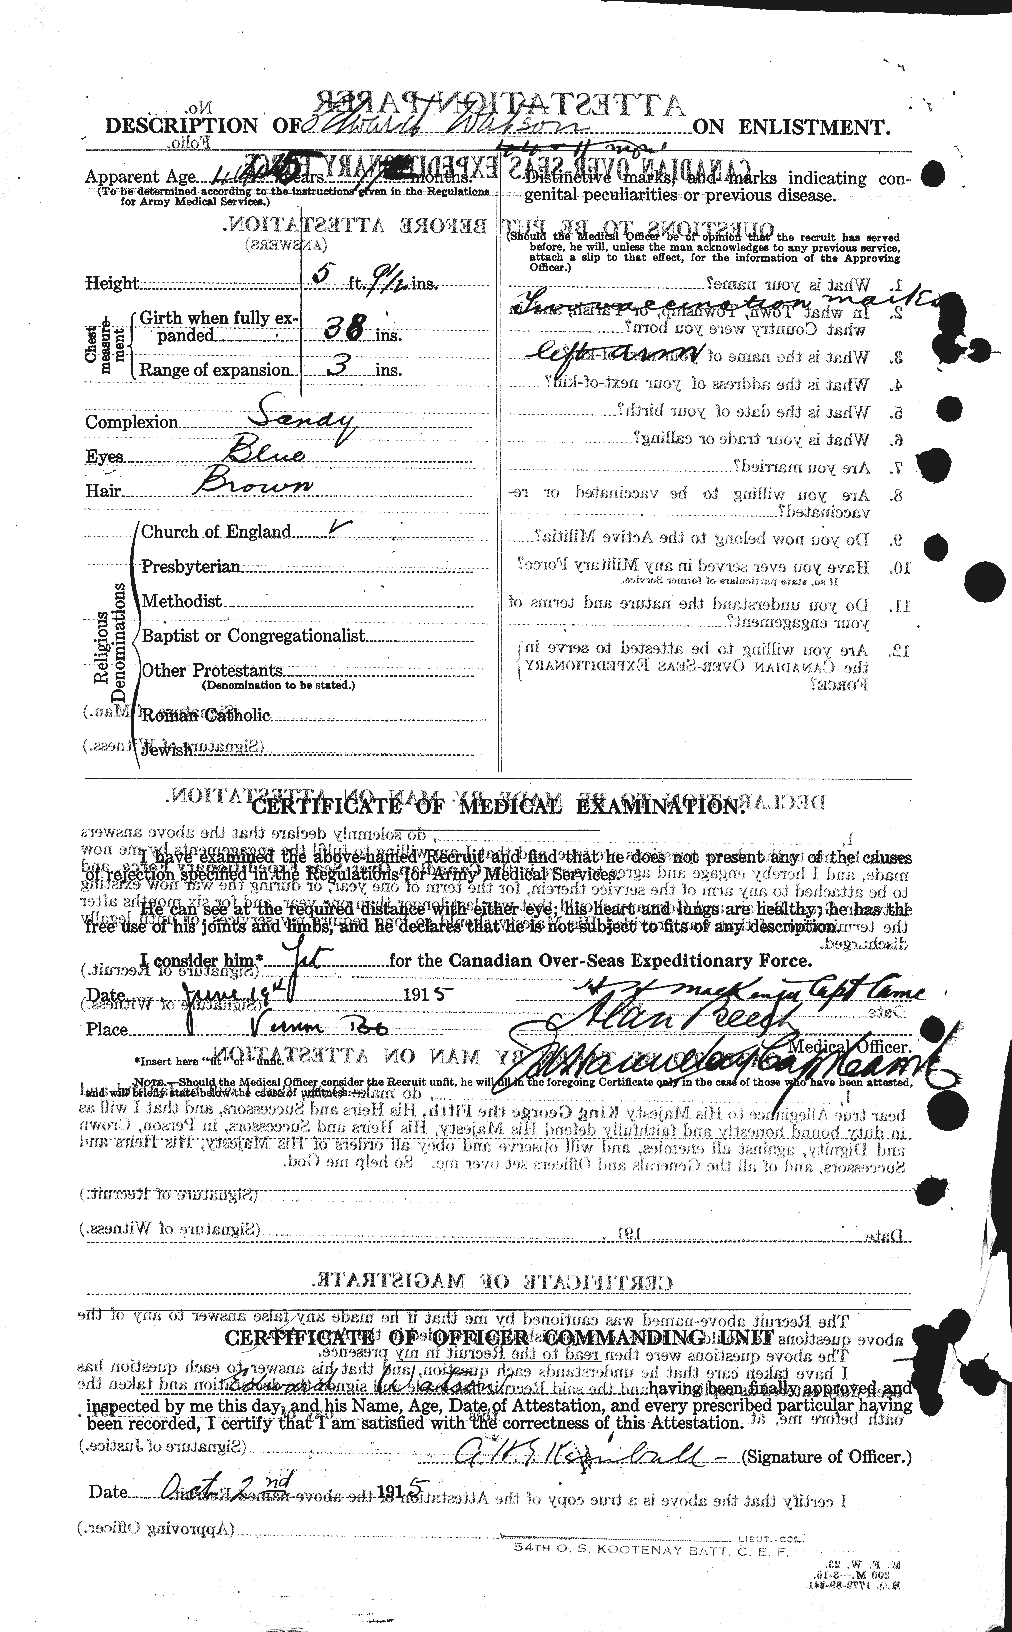 Personnel Records of the First World War - CEF 660400b